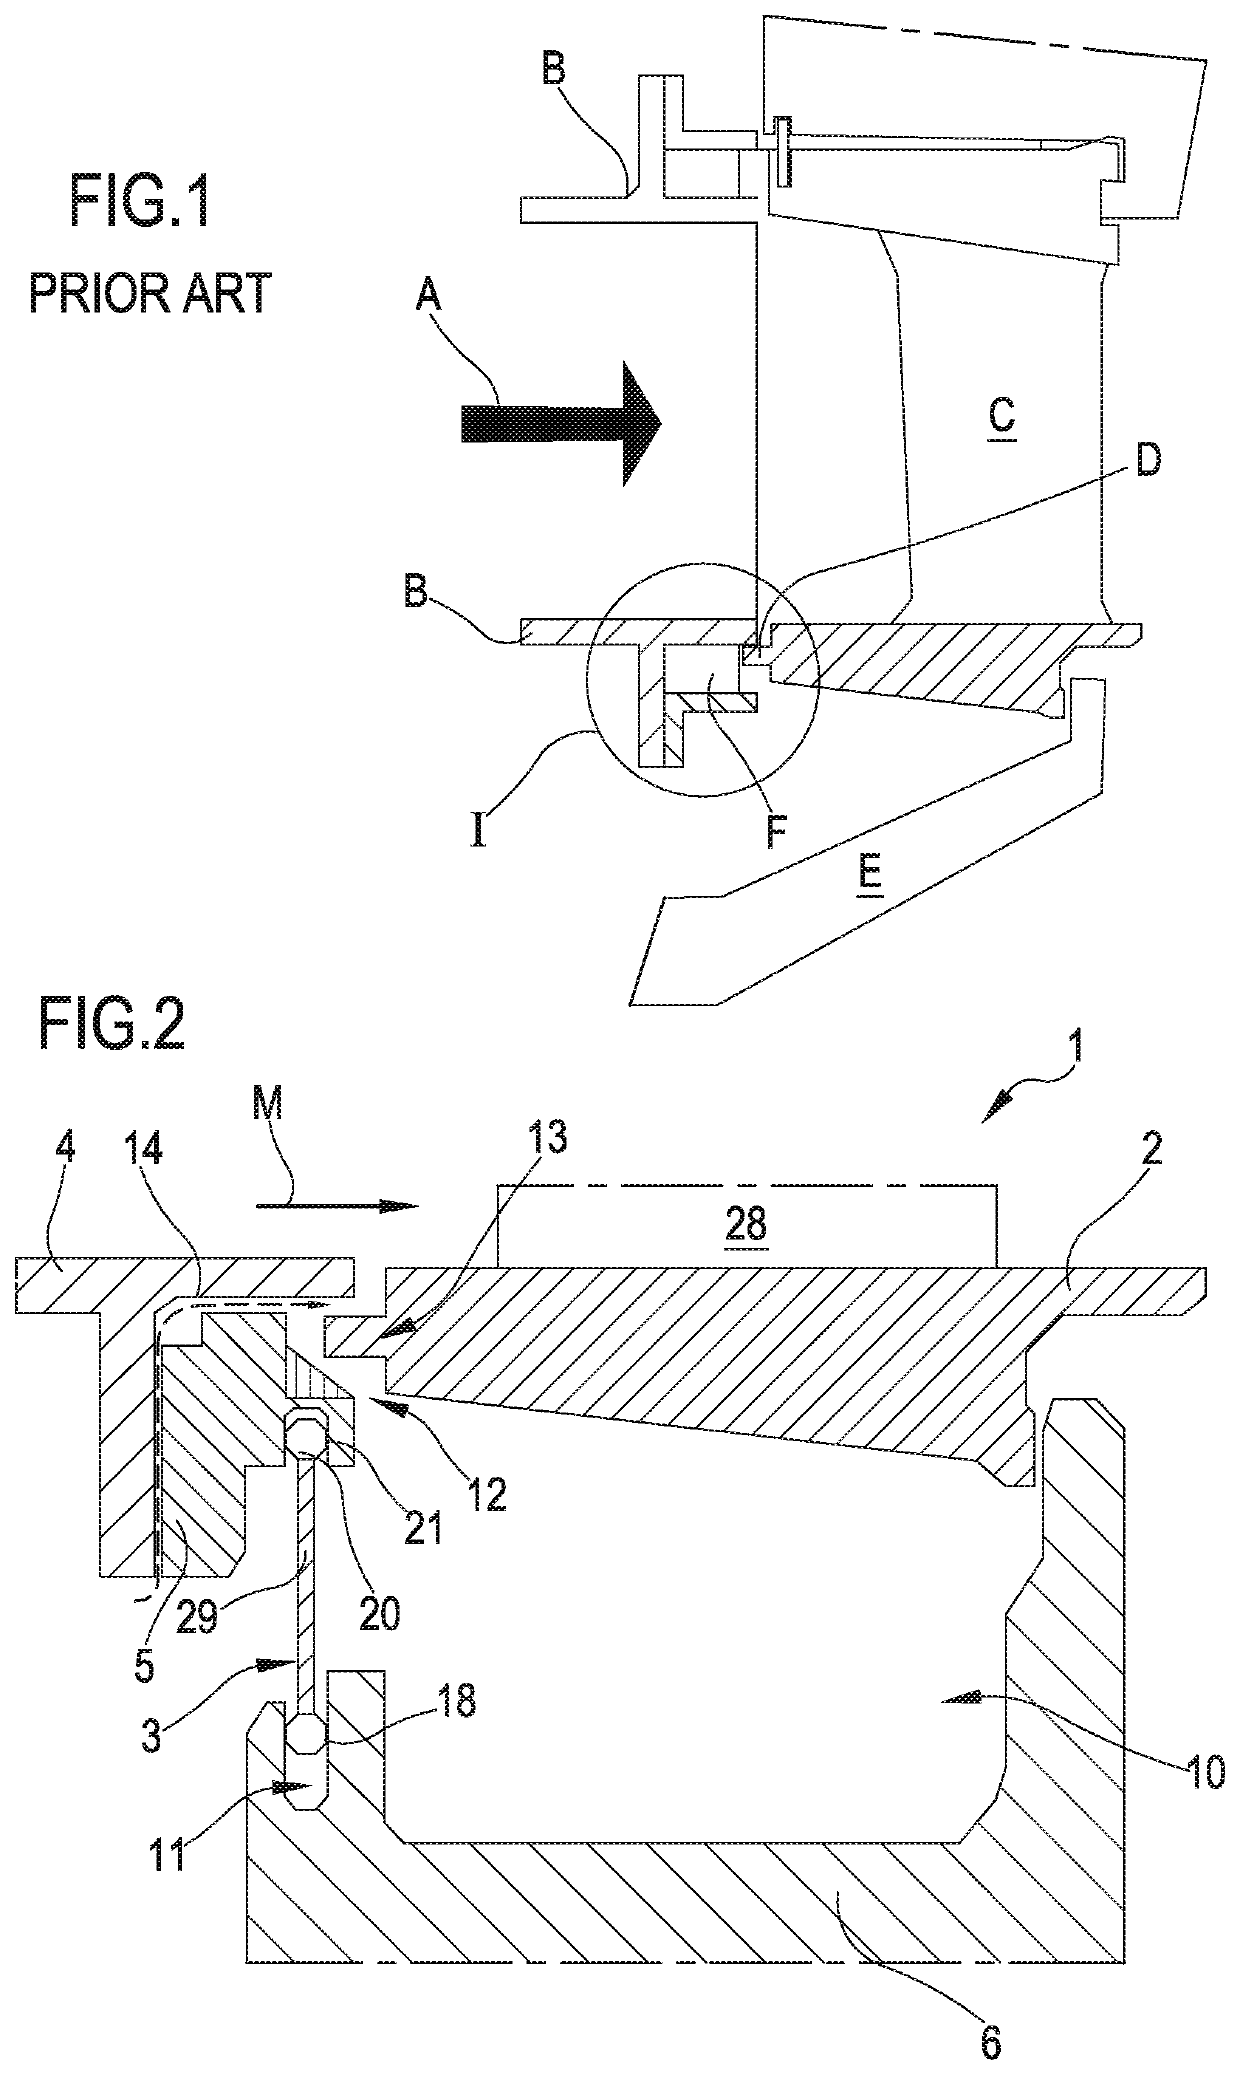 Sealing arrangement on combustor to turbine interface in a gas turbine